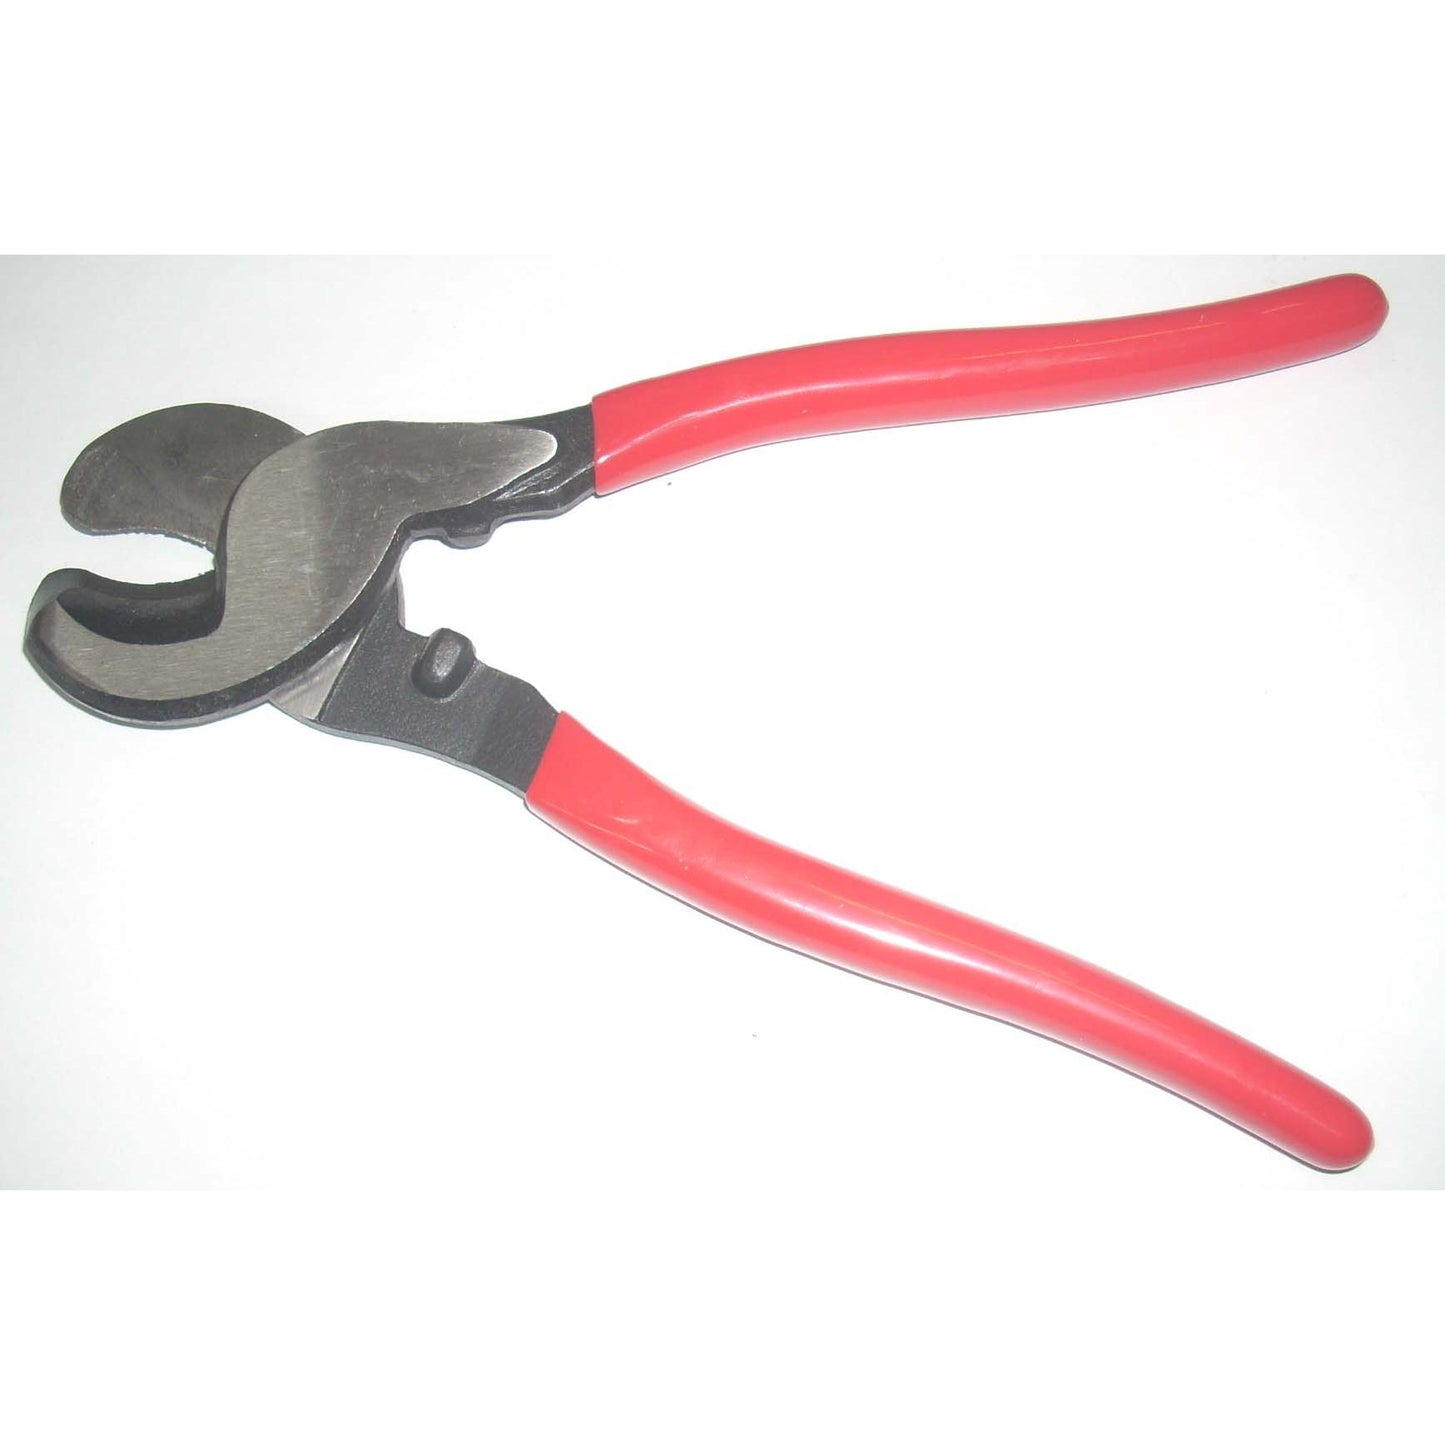 Powerweld PW52 Cable Cutters for Aluminum or Copper